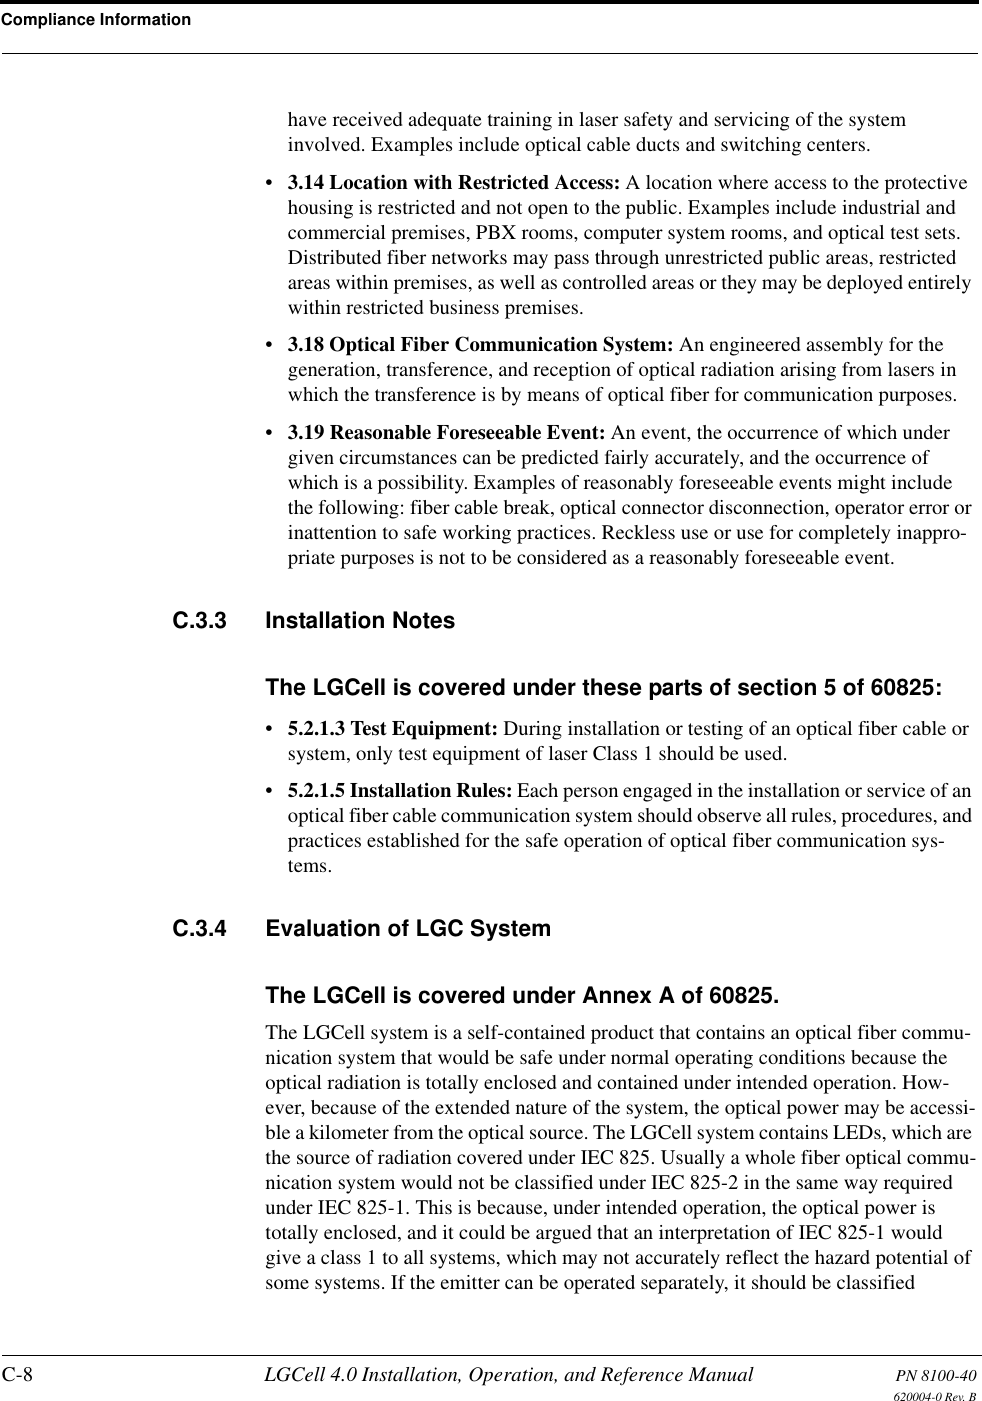 Compliance InformationC-8 LGCell 4.0 Installation, Operation, and Reference Manual PN 8100-40620004-0 Rev. Bhave received adequate training in laser safety and servicing of the system involved. Examples include optical cable ducts and switching centers.•3.14 Location with Restricted Access: A location where access to the protective housing is restricted and not open to the public. Examples include industrial and commercial premises, PBX rooms, computer system rooms, and optical test sets. Distributed fiber networks may pass through unrestricted public areas, restricted areas within premises, as well as controlled areas or they may be deployed entirely within restricted business premises.•3.18 Optical Fiber Communication System: An engineered assembly for the generation, transference, and reception of optical radiation arising from lasers in which the transference is by means of optical fiber for communication purposes.•3.19 Reasonable Foreseeable Event: An event, the occurrence of which under given circumstances can be predicted fairly accurately, and the occurrence of which is a possibility. Examples of reasonably foreseeable events might include the following: fiber cable break, optical connector disconnection, operator error or inattention to safe working practices. Reckless use or use for completely inappro-priate purposes is not to be considered as a reasonably foreseeable event.C.3.3 Installation NotesThe LGCell is covered under these parts of section 5 of 60825:•5.2.1.3 Test Equipment: During installation or testing of an optical fiber cable or system, only test equipment of laser Class 1 should be used.•5.2.1.5 Installation Rules: Each person engaged in the installation or service of an optical fiber cable communication system should observe all rules, procedures, and practices established for the safe operation of optical fiber communication sys-tems.C.3.4 Evaluation of LGC SystemThe LGCell is covered under Annex A of 60825.The LGCell system is a self-contained product that contains an optical fiber commu-nication system that would be safe under normal operating conditions because the optical radiation is totally enclosed and contained under intended operation. How-ever, because of the extended nature of the system, the optical power may be accessi-ble a kilometer from the optical source. The LGCell system contains LEDs, which are the source of radiation covered under IEC 825. Usually a whole fiber optical commu-nication system would not be classified under IEC 825-2 in the same way required under IEC 825-1. This is because, under intended operation, the optical power is totally enclosed, and it could be argued that an interpretation of IEC 825-1 would give a class 1 to all systems, which may not accurately reflect the hazard potential of some systems. If the emitter can be operated separately, it should be classified 